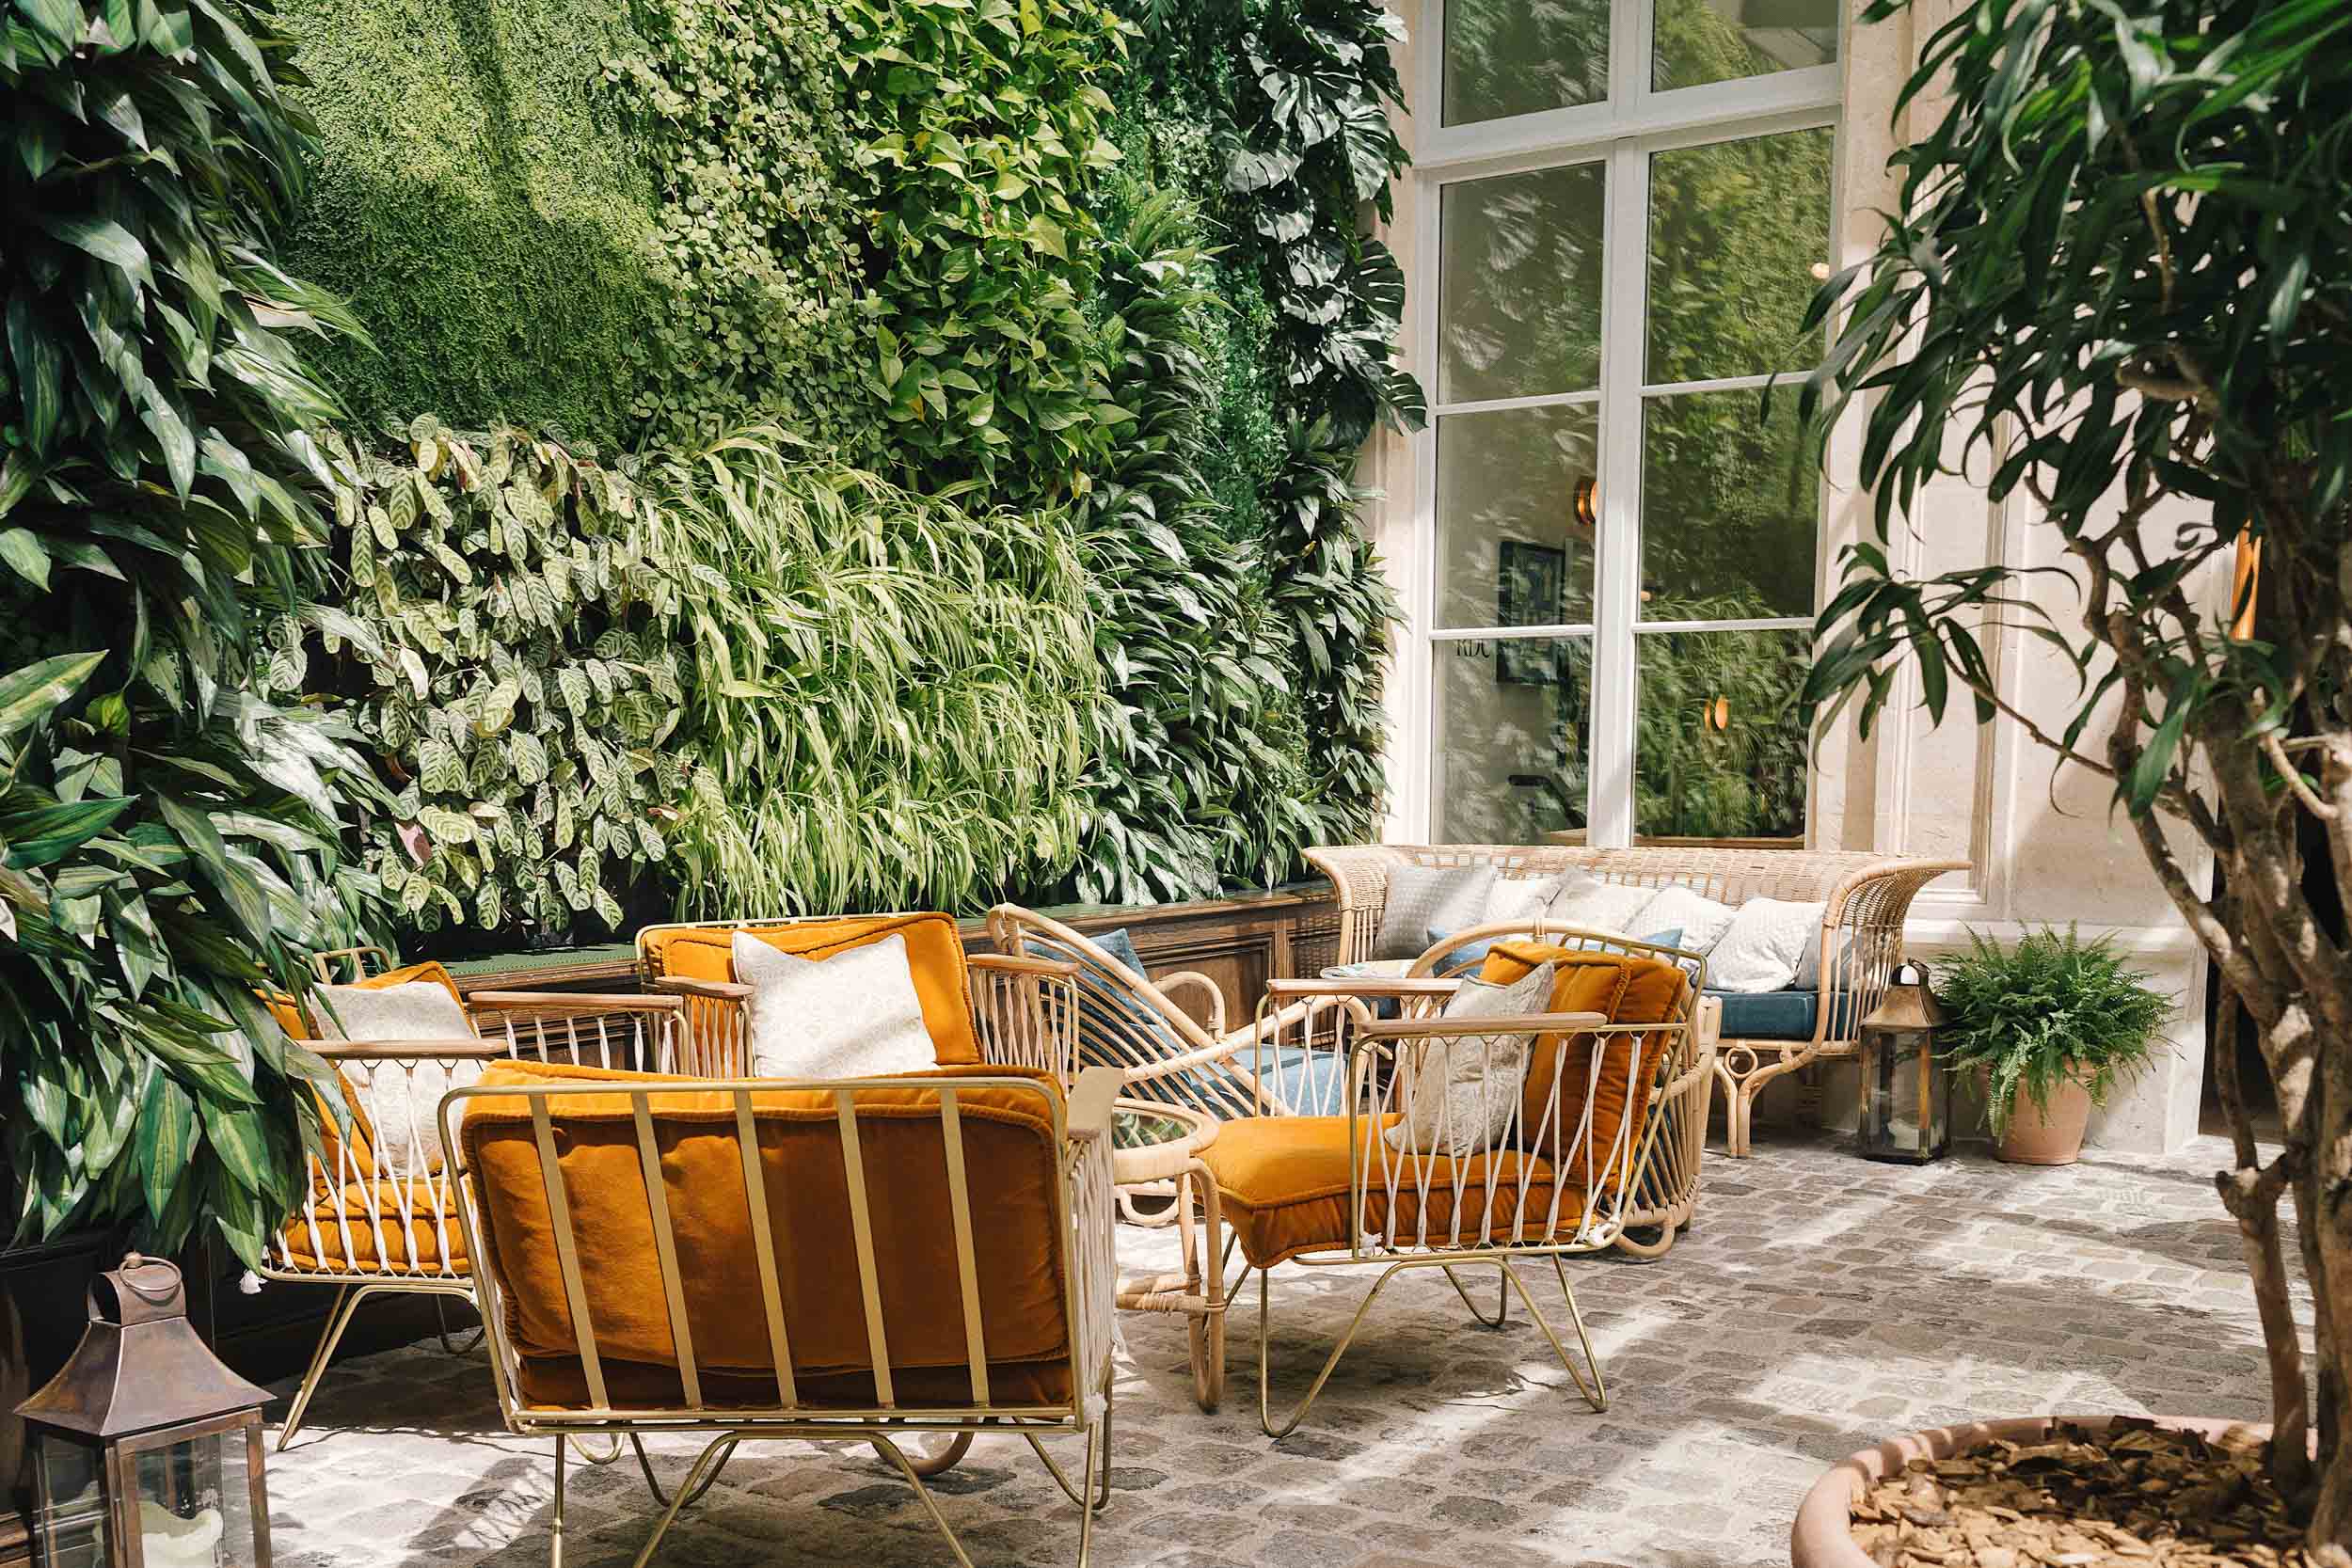 The Hoxton Paris is a very beautiful place to stay